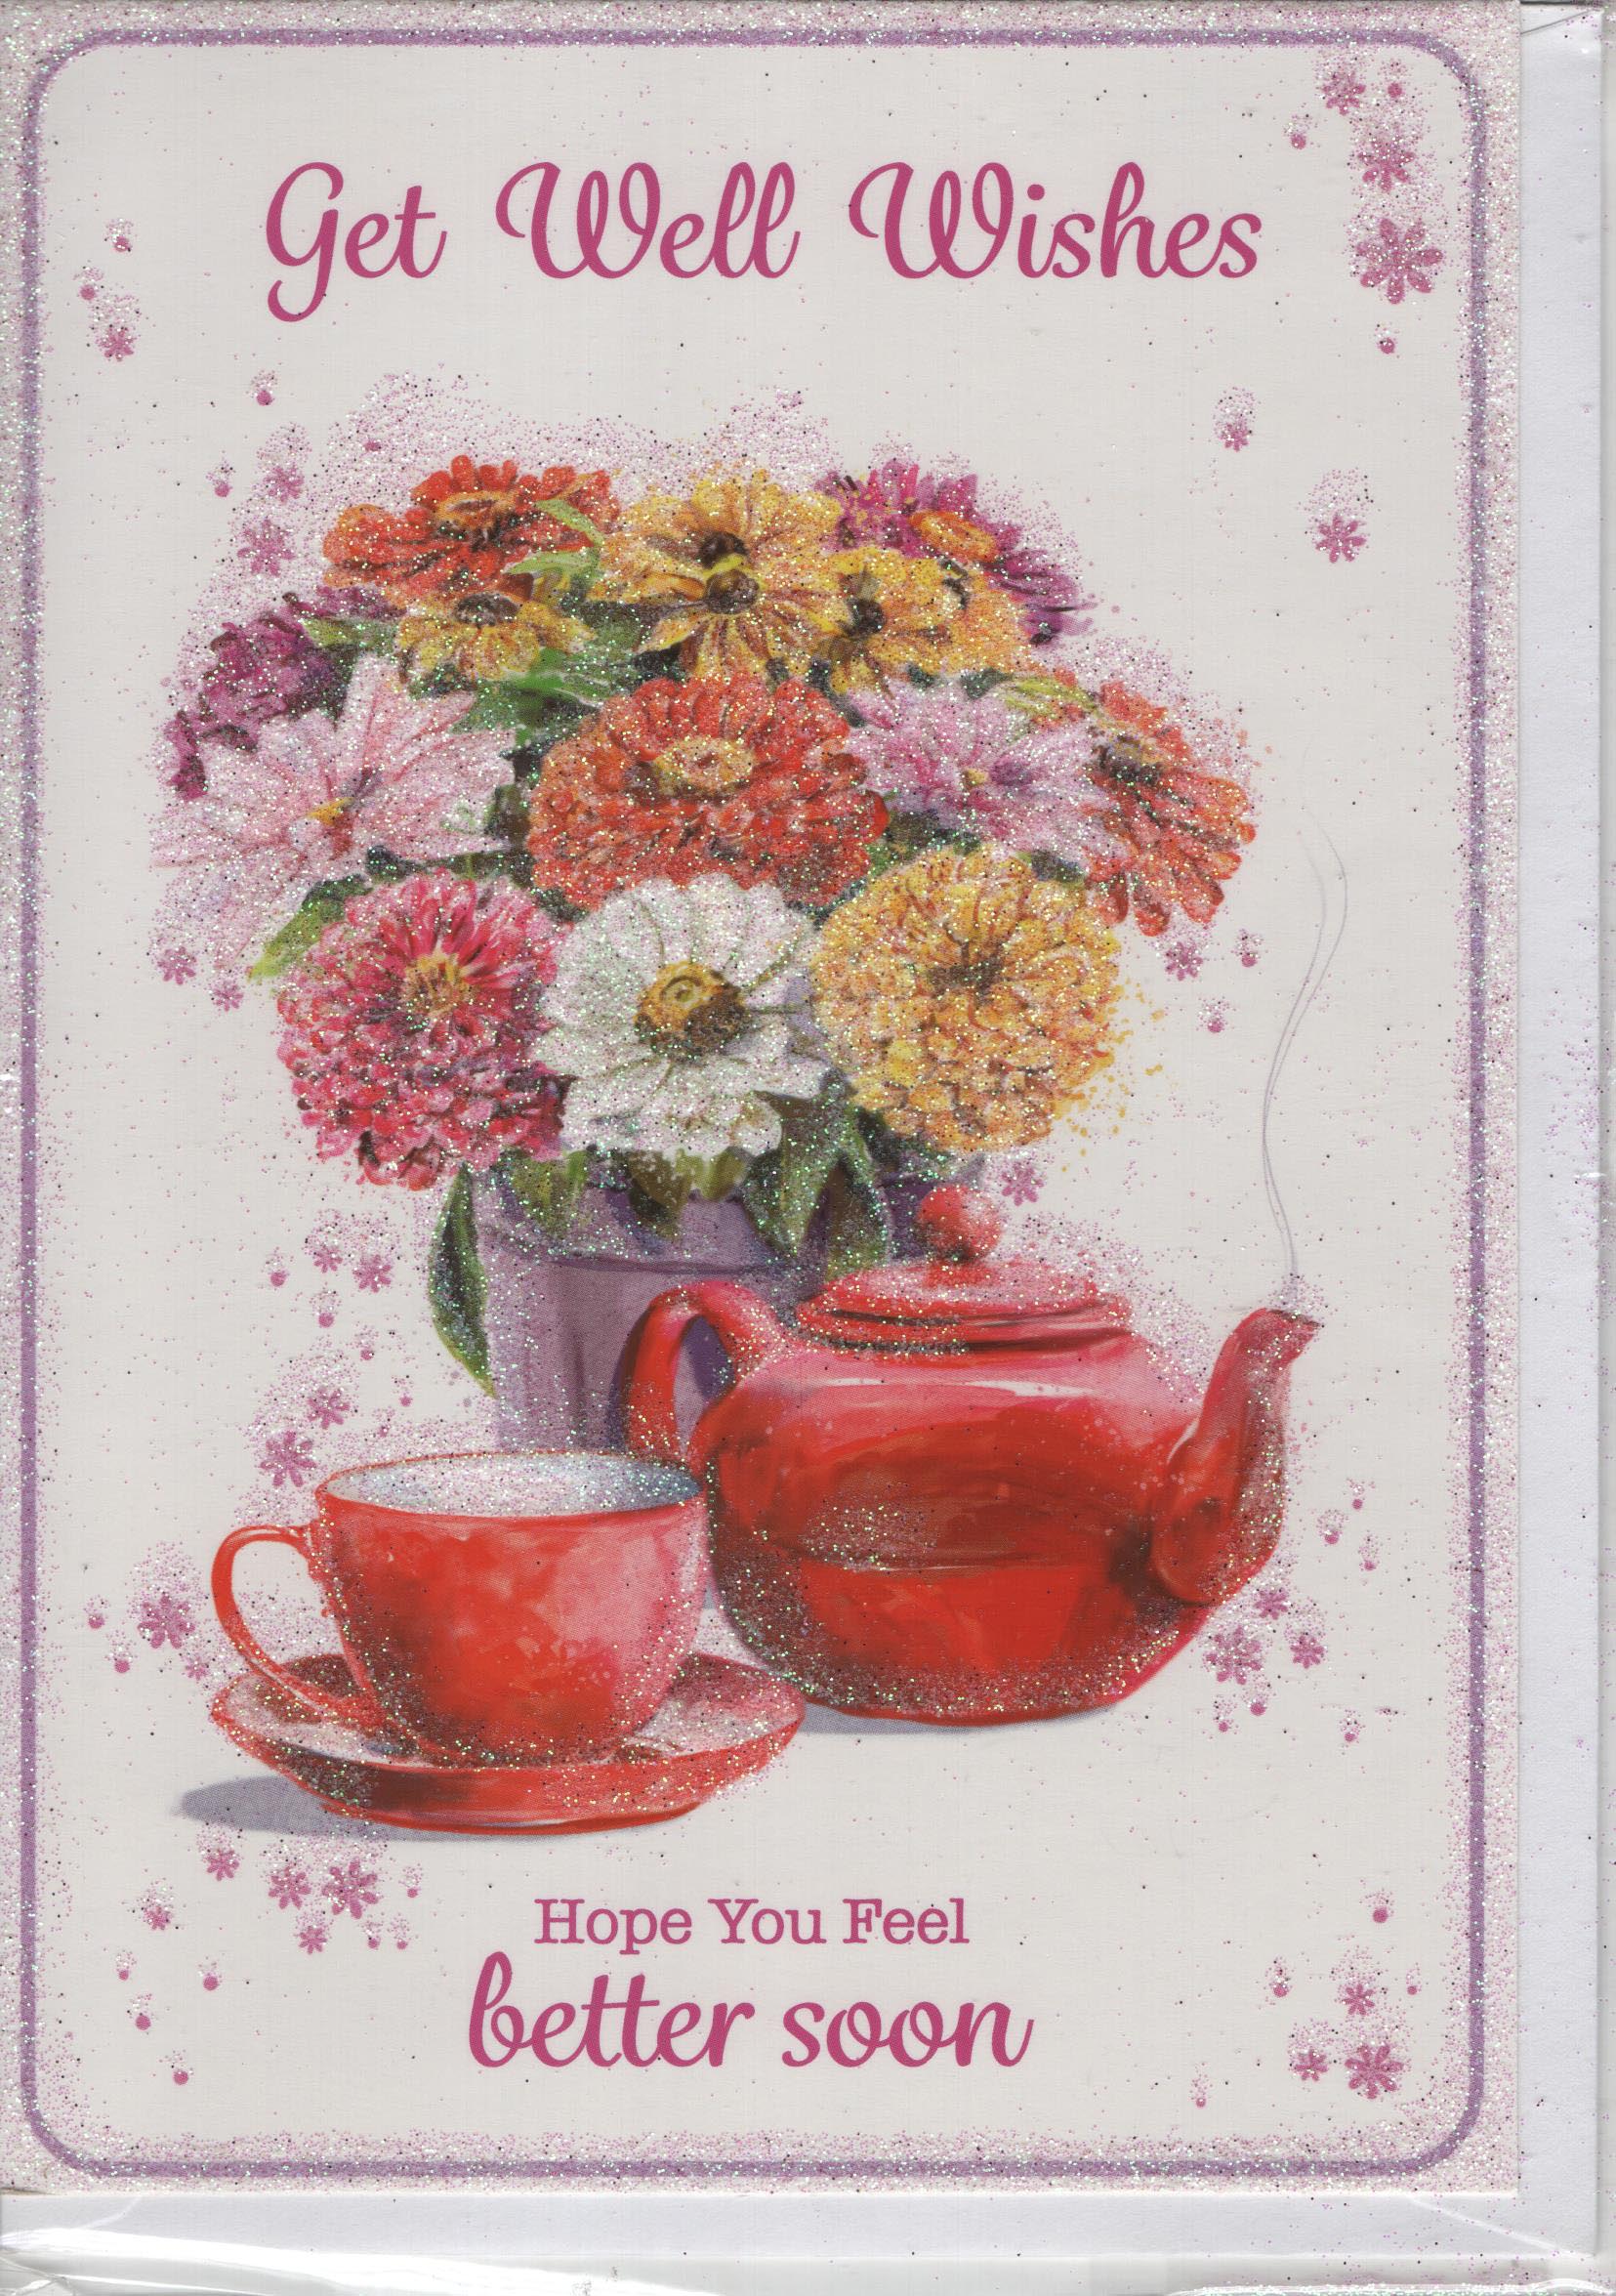 Get Well Wishes Hope You Feel Better Soon Greeting Card